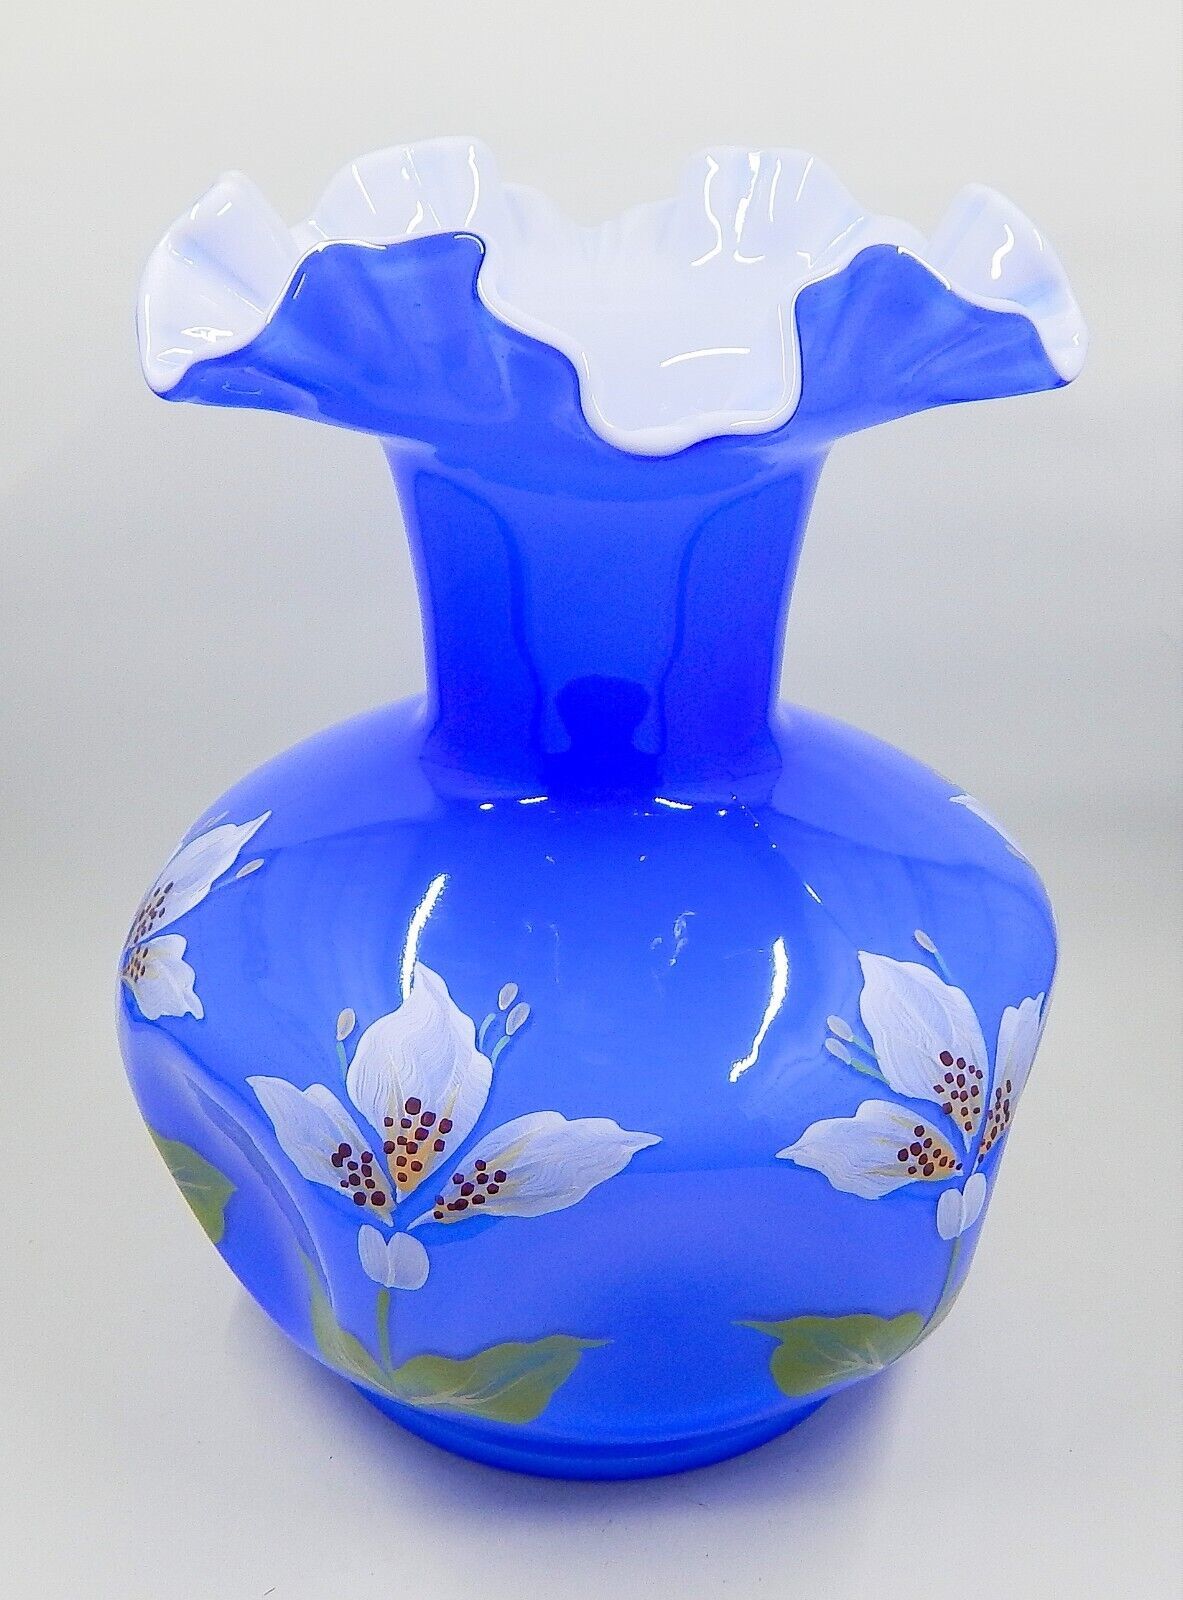 Fenton Blue Overlay Cased Glass White Hand-Painted Flowers Pinched Ruffle Vase - $159.99